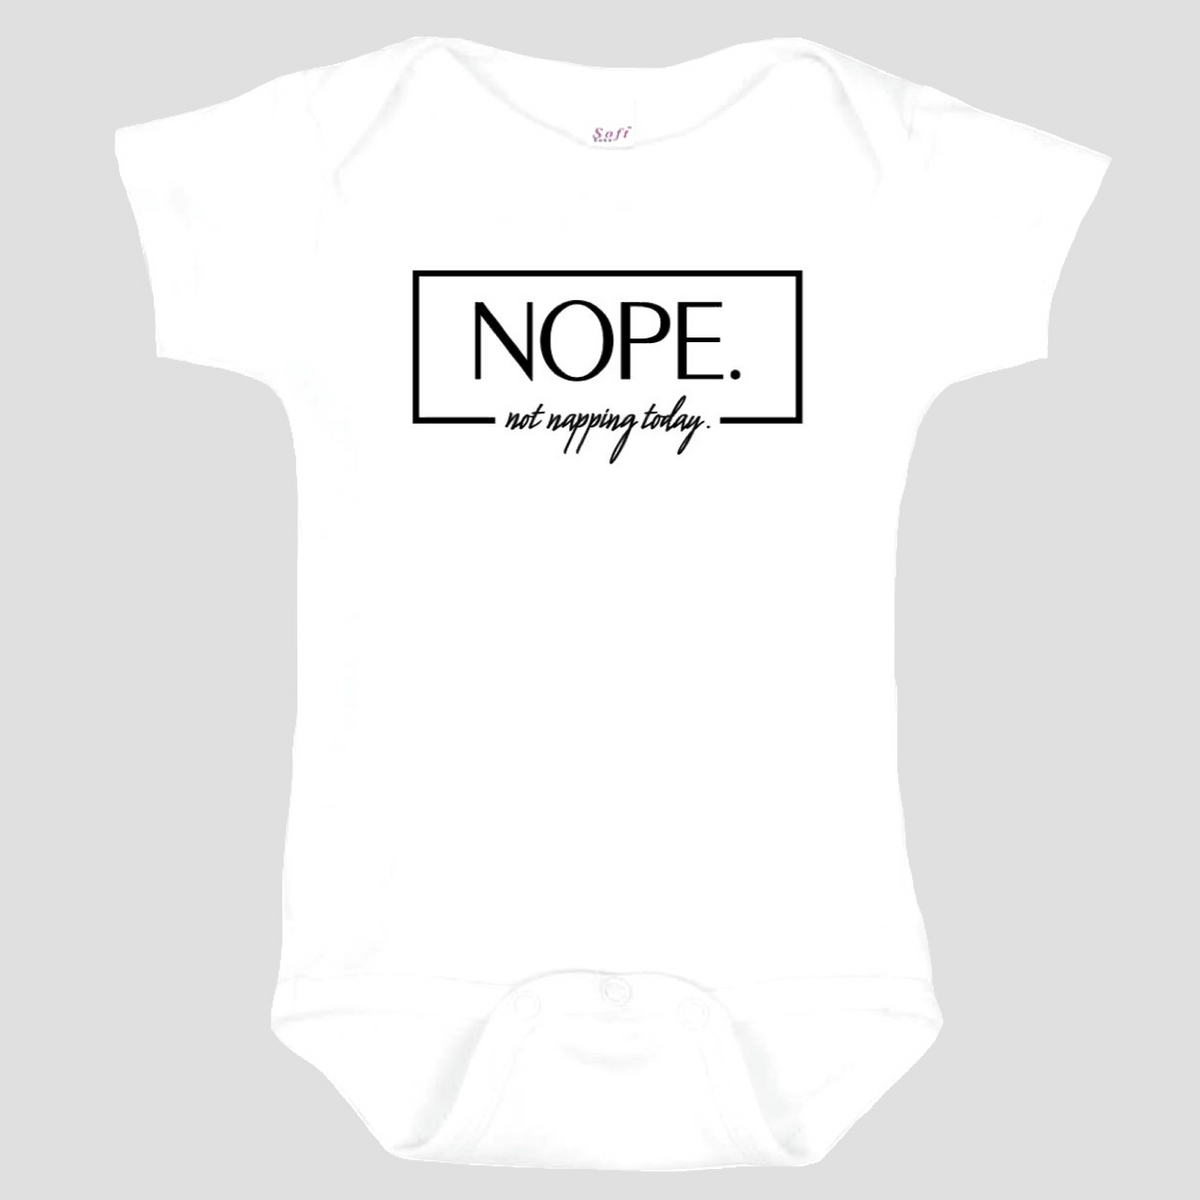 Baby Onesie: Nope. Not napping today.